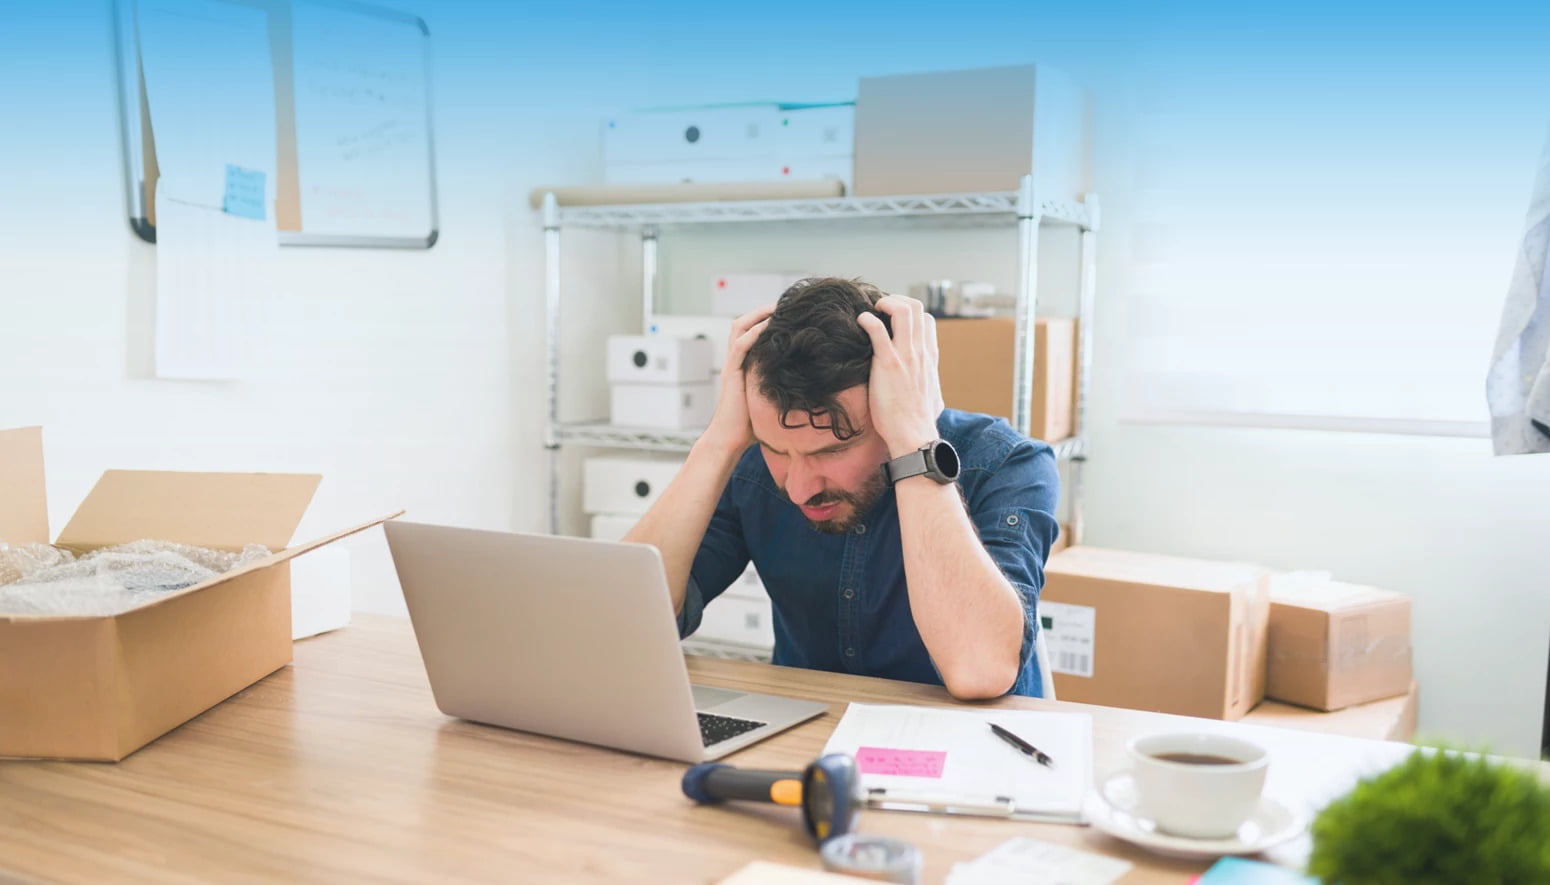 Does your business stress you out?